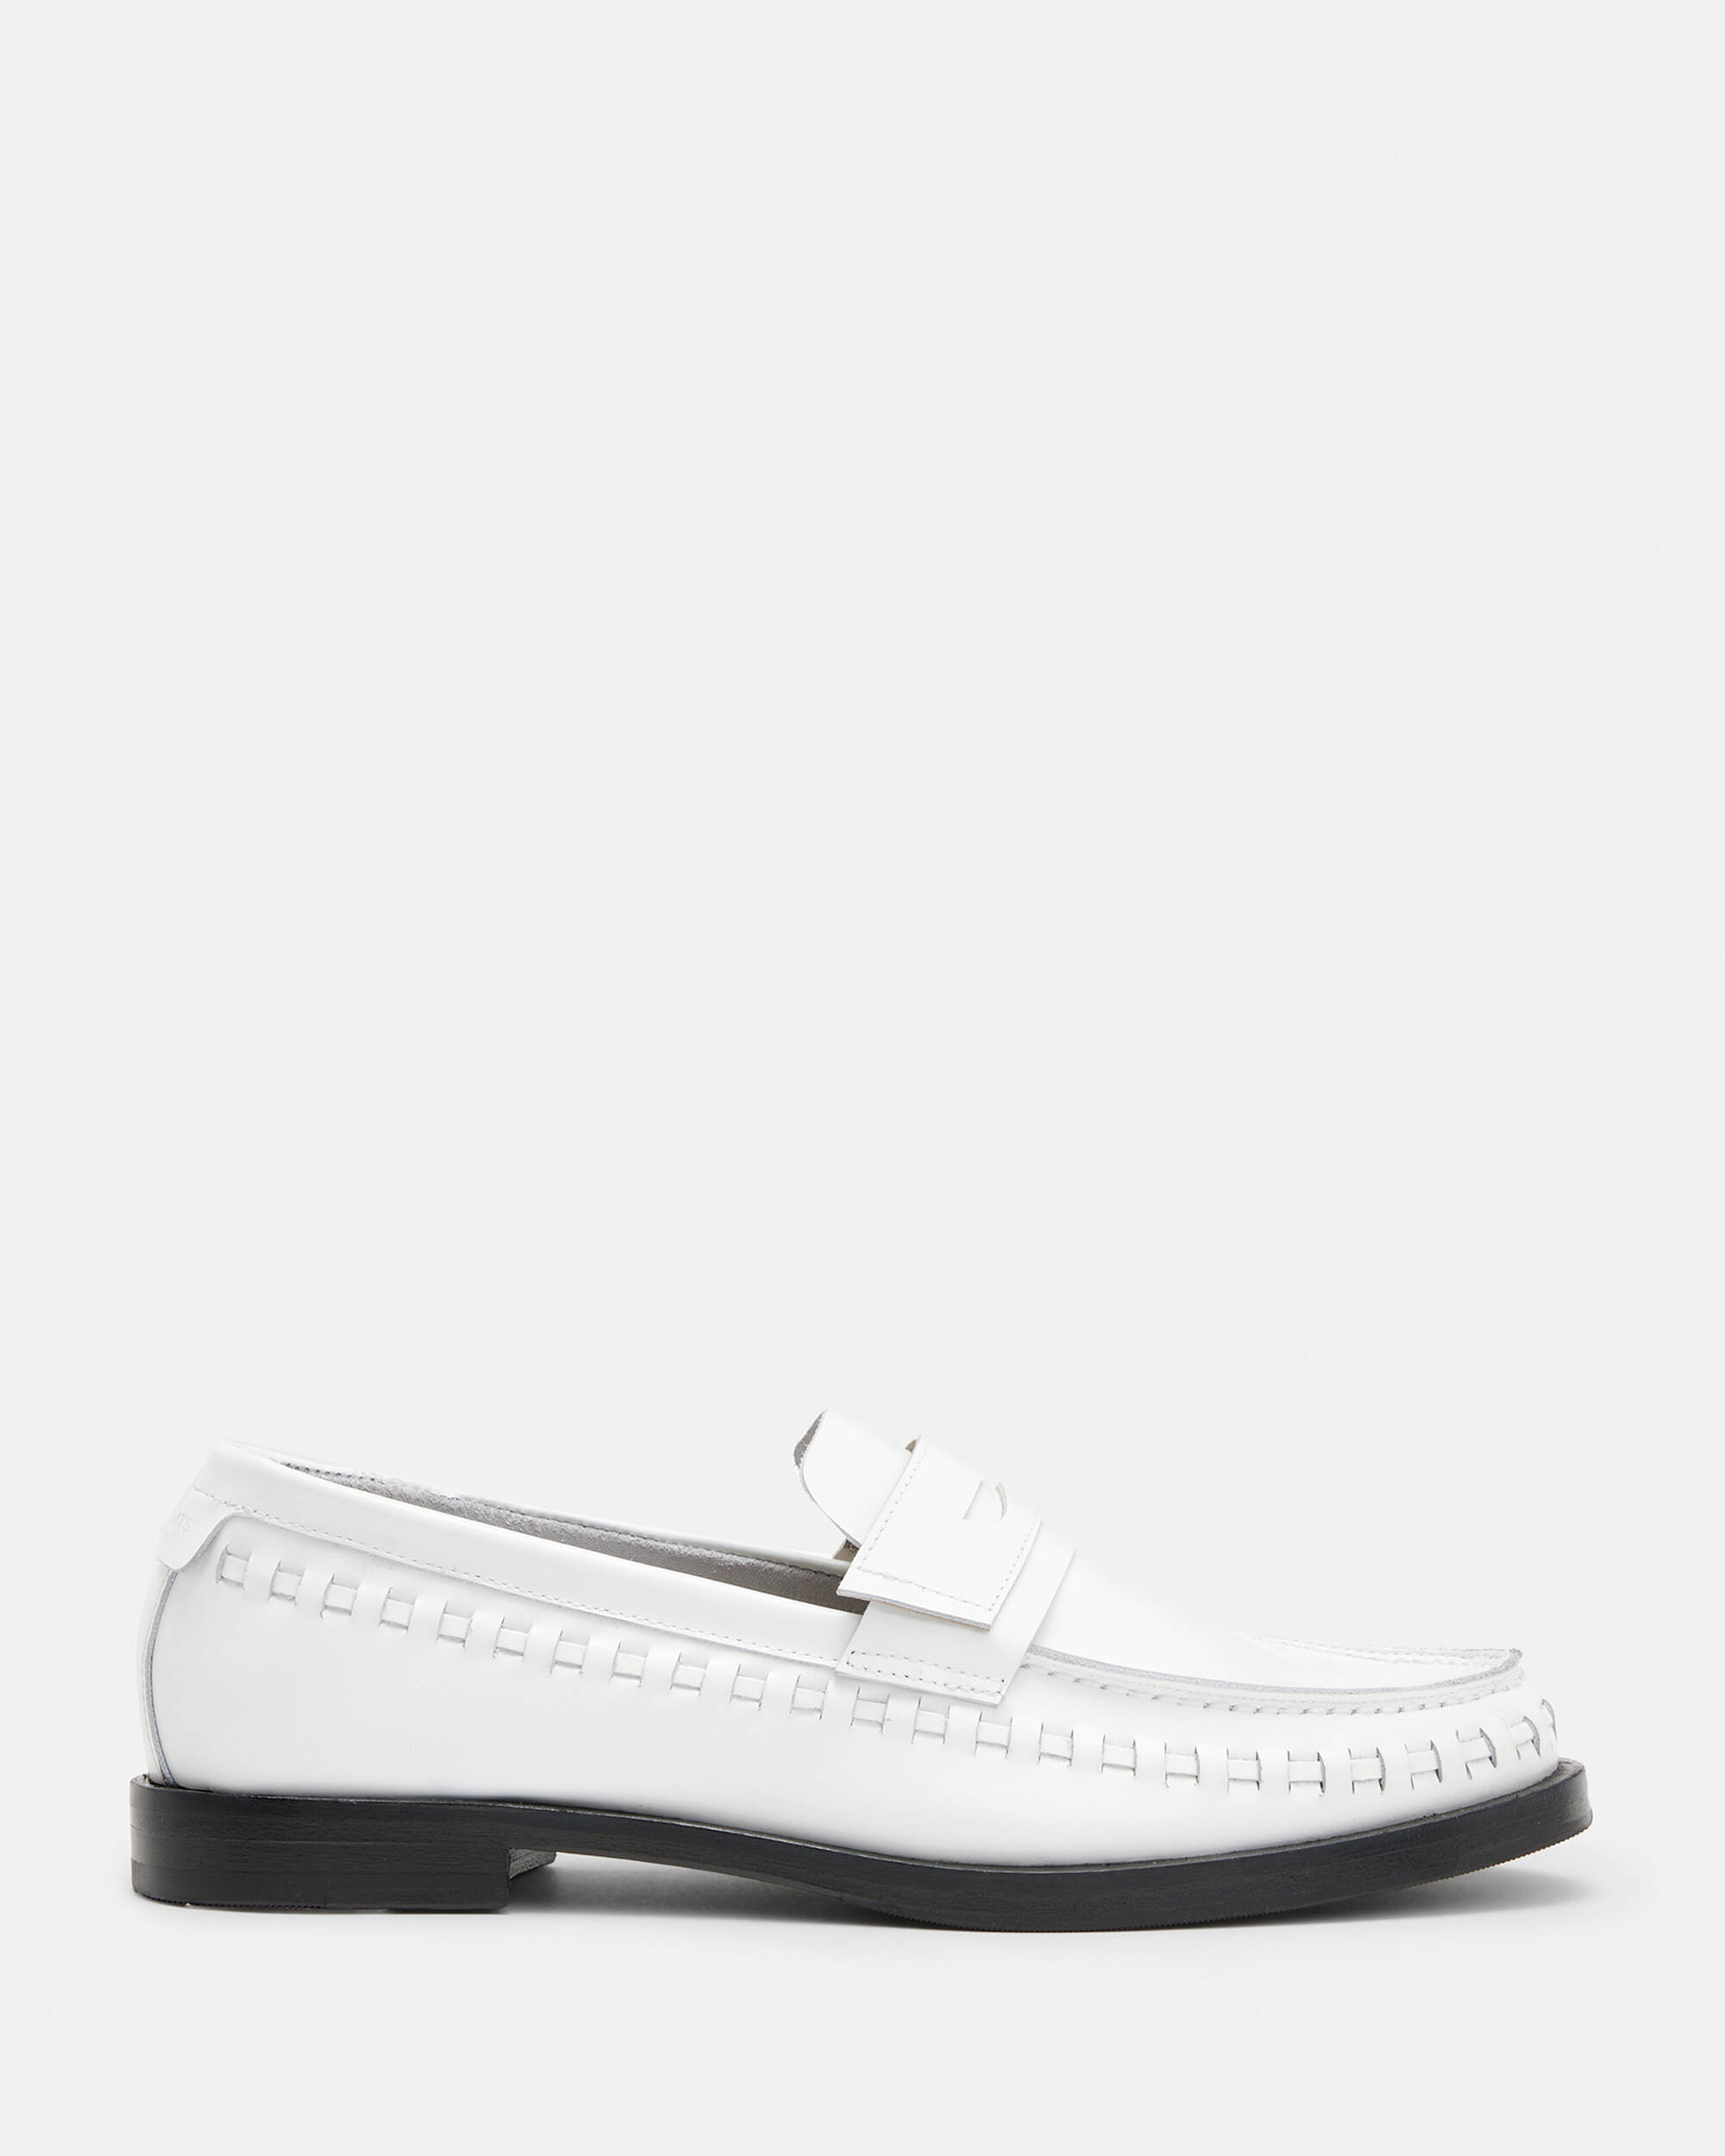 Sofie Leather Loafers Chalk White | ALLSAINTS